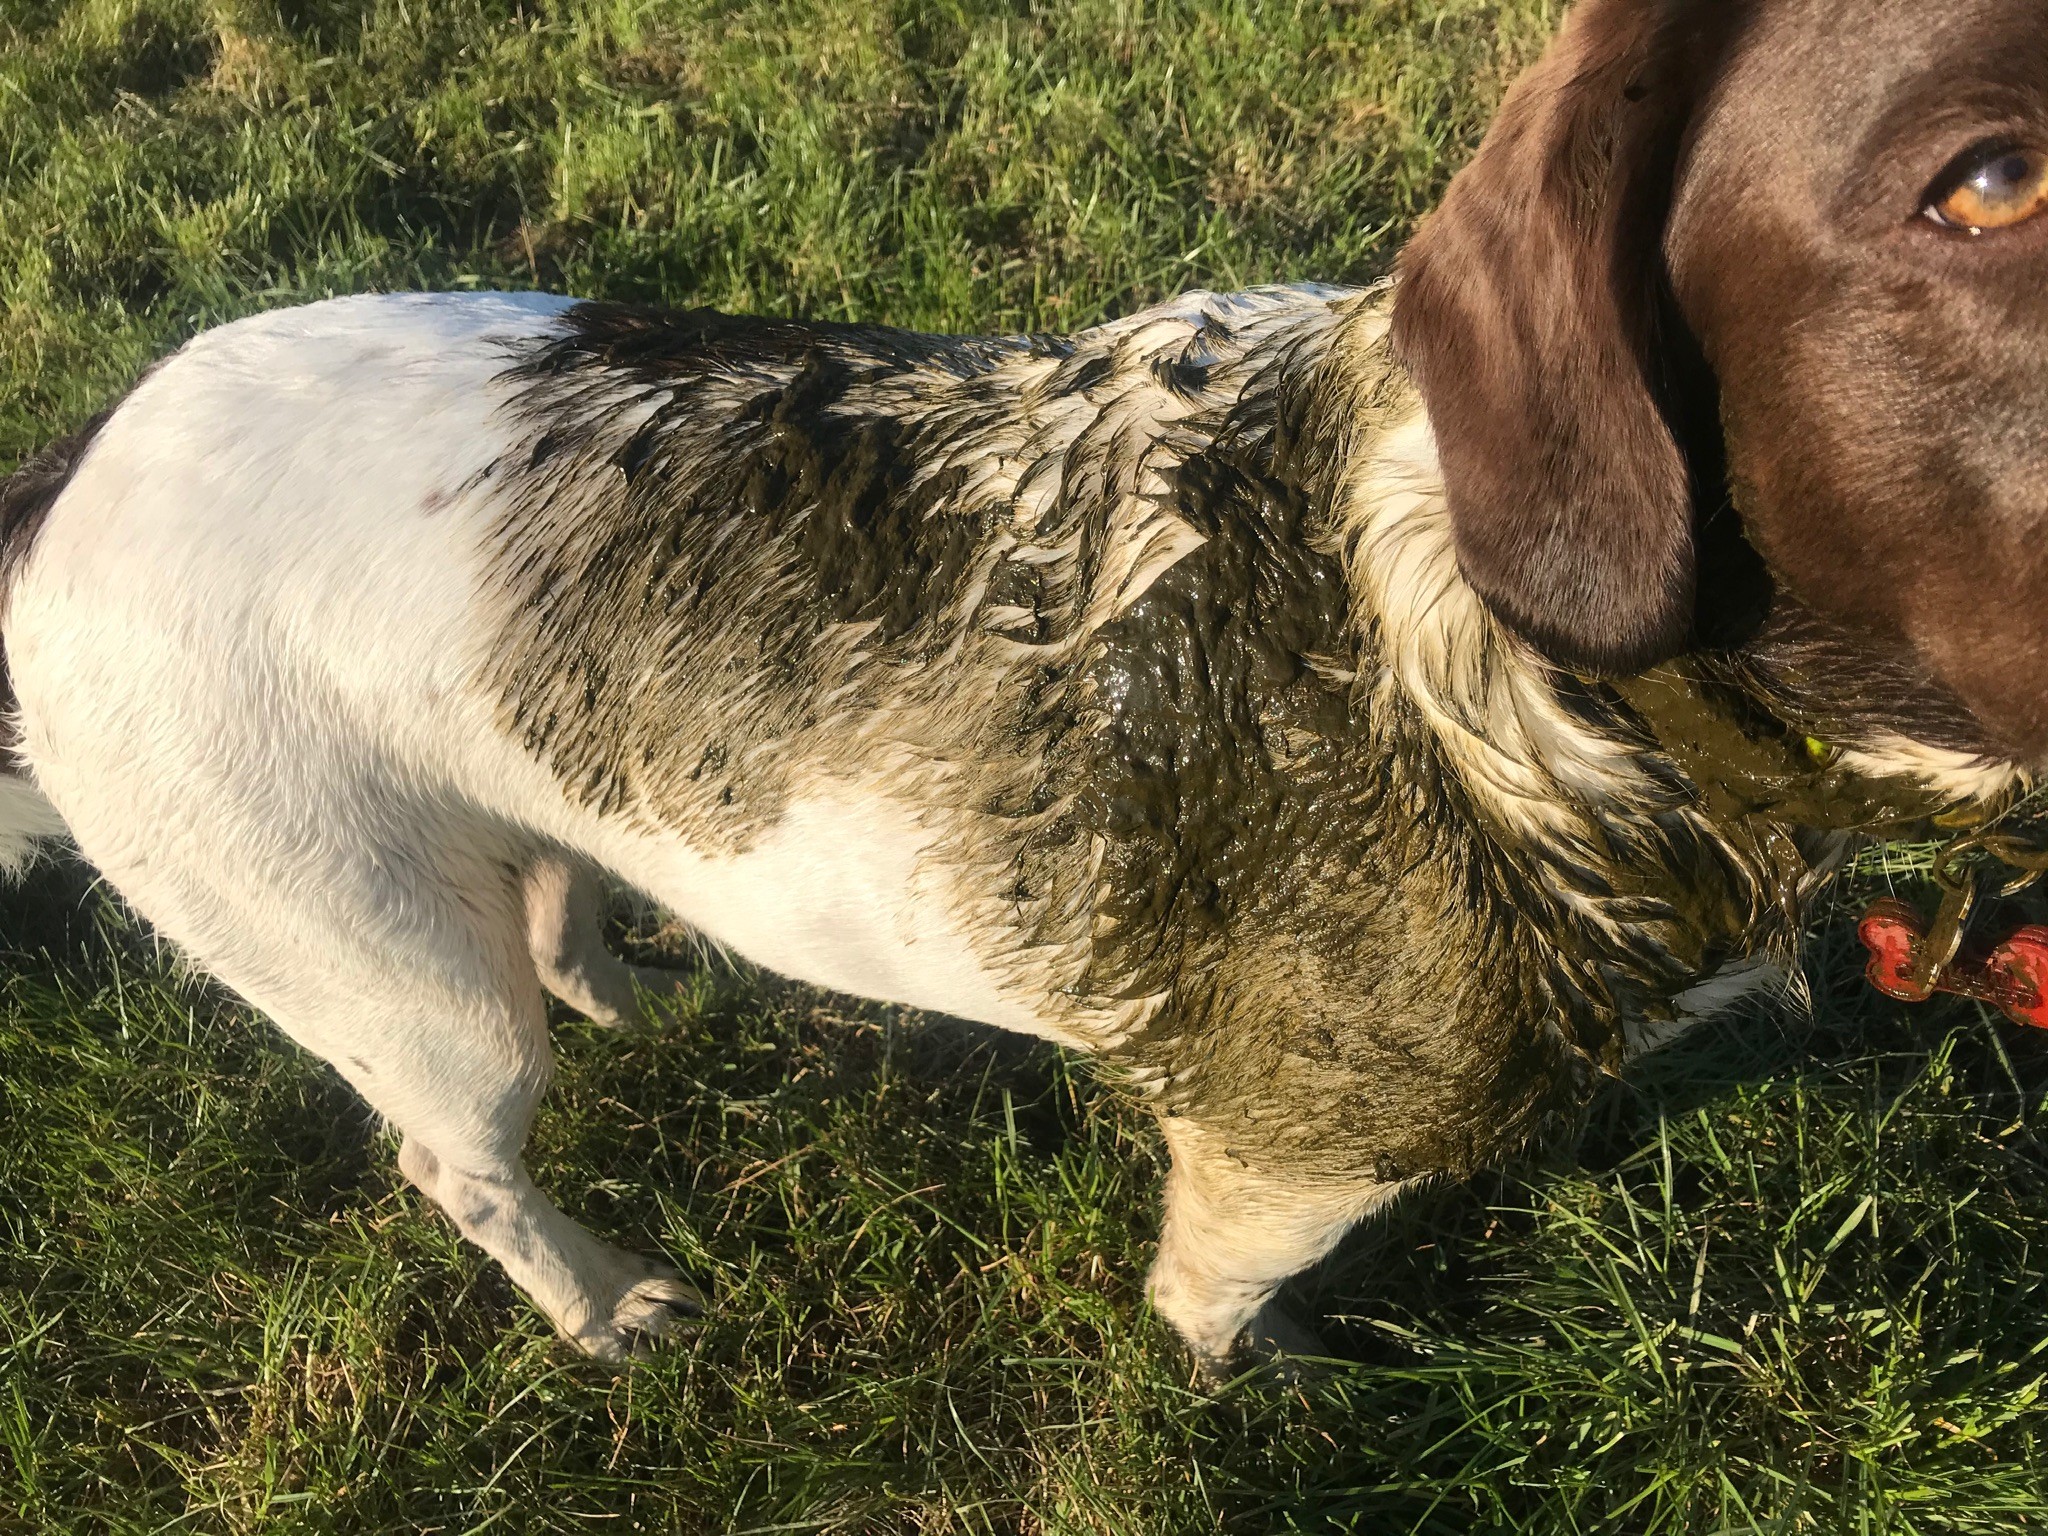 Margot, a spaniel and one of our mucky pups, standing in the grass with their back covered in cowpat muck.